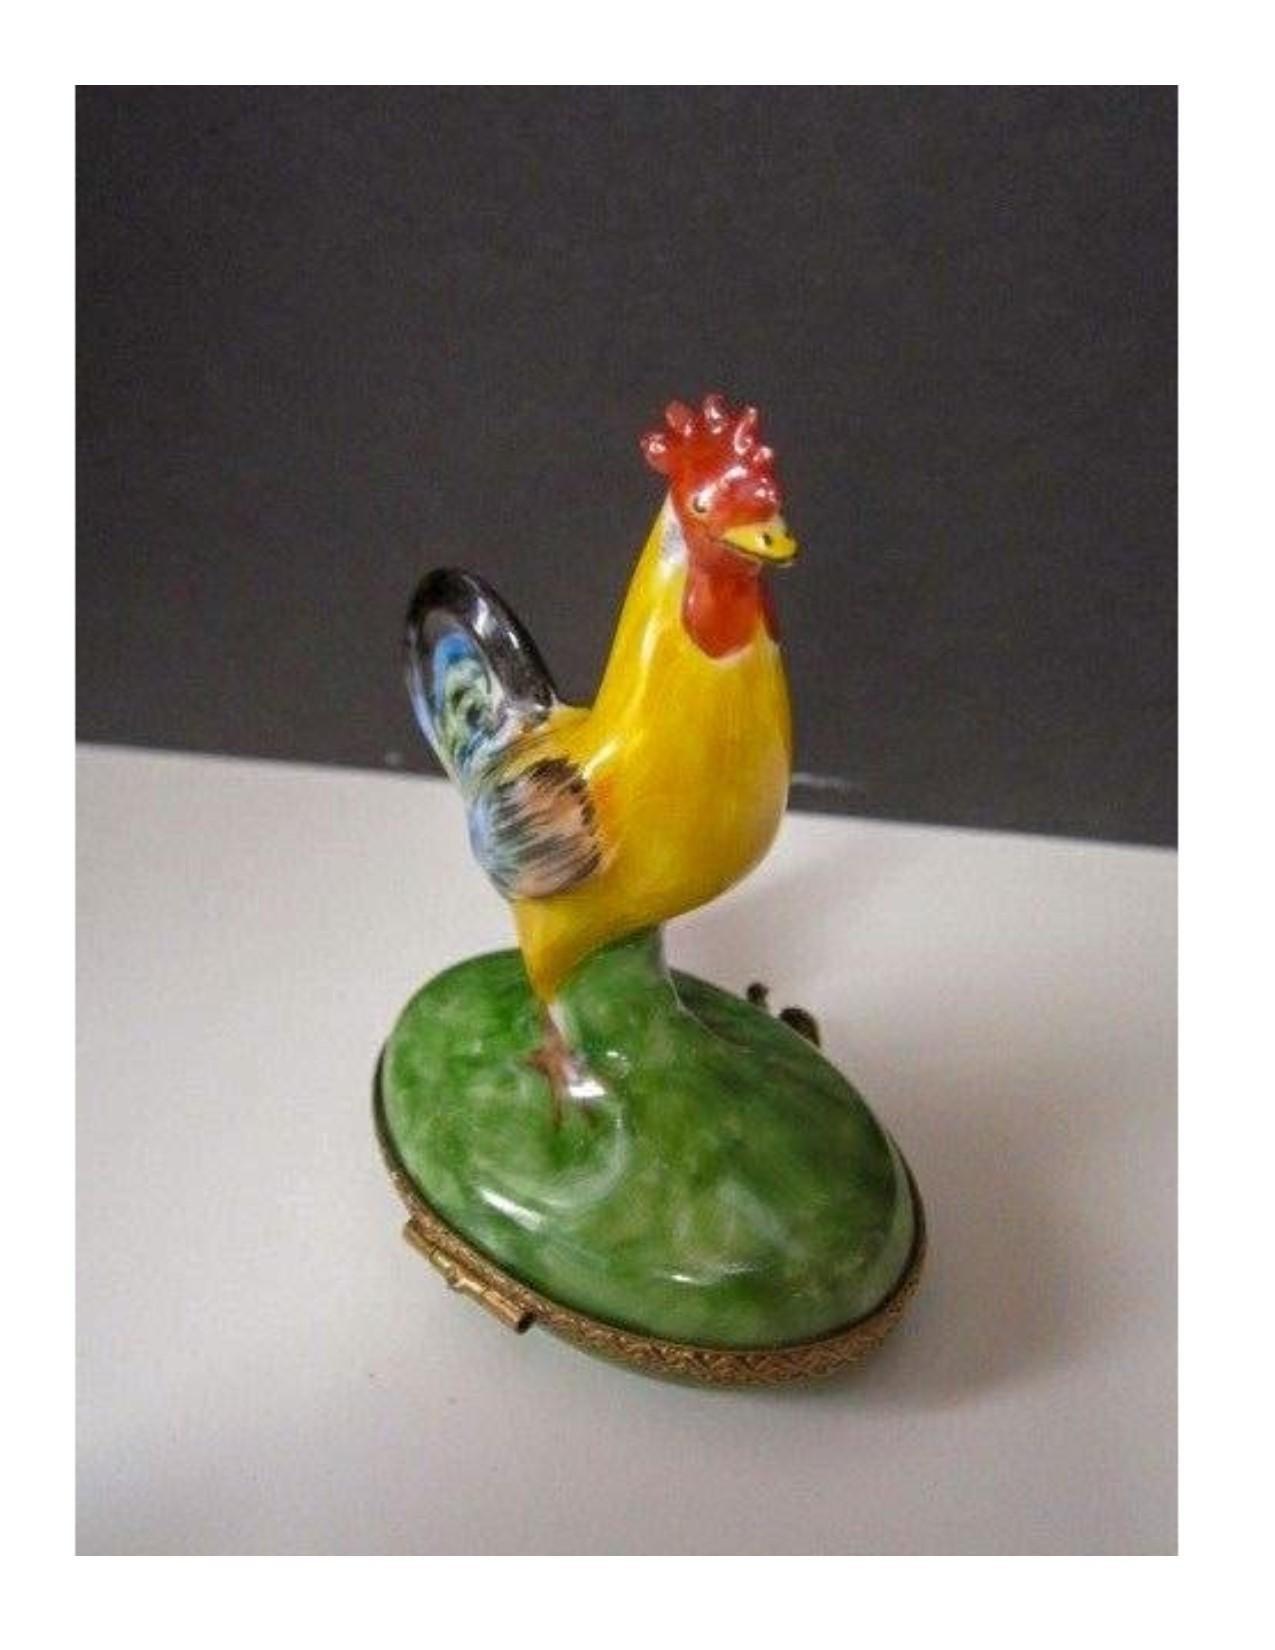 Terrific Limoges rooster shaped box. Marked Peint Main Limoges France. Artist AB.